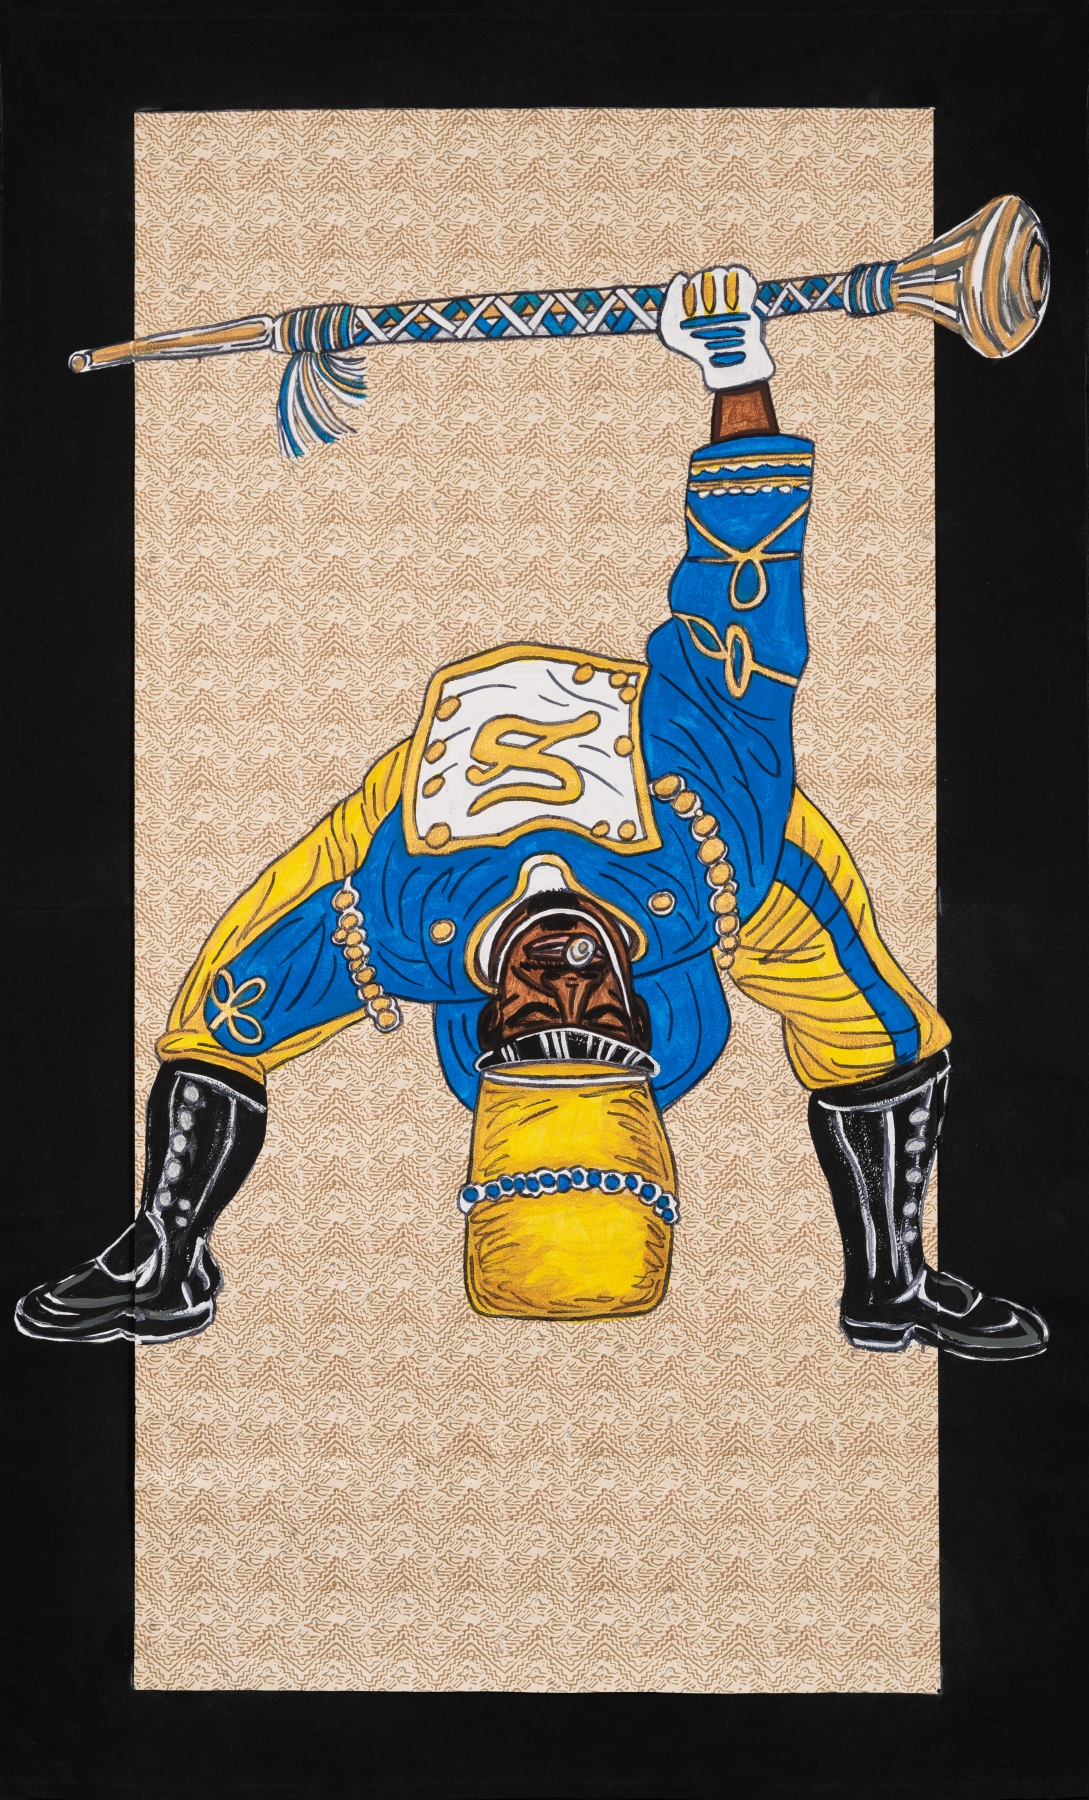 Keith Duncan, Southern University Drum Major 1, 2020
61 x 37 inches